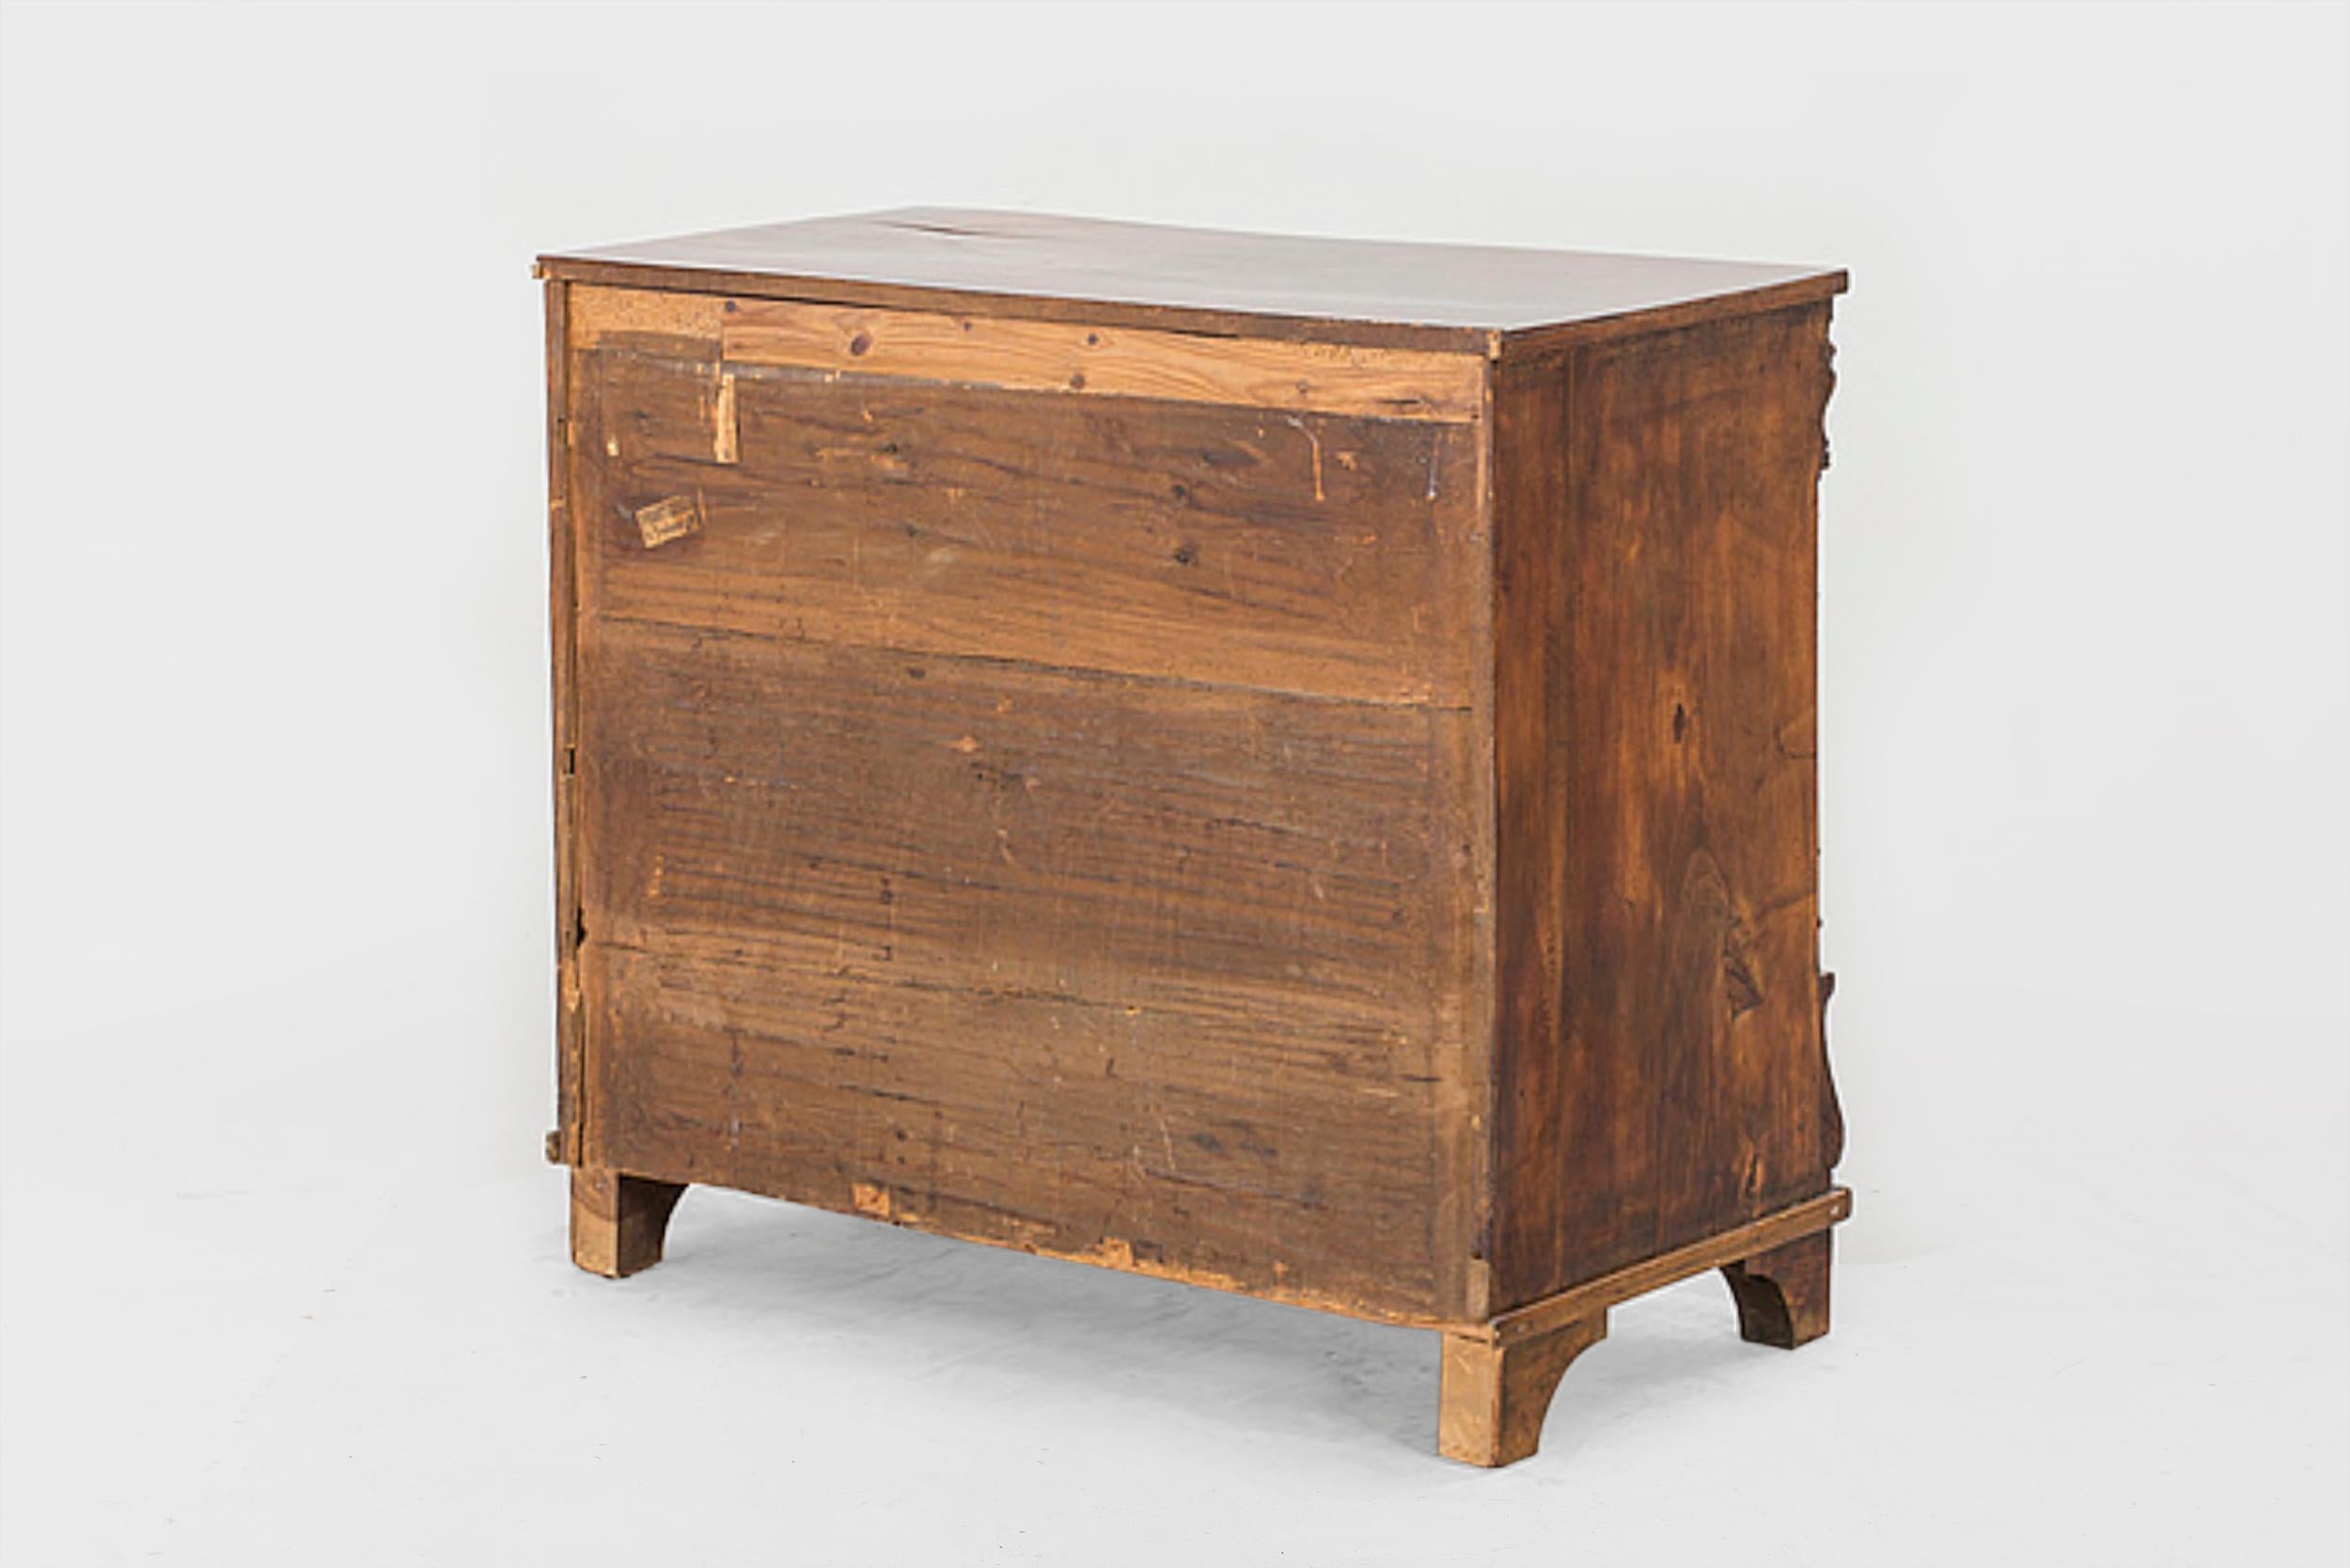 19th century Swedish writing commode / chest of drawers
Date: 1800
Material: Walnut
Structure: Three drawers with key included.

  